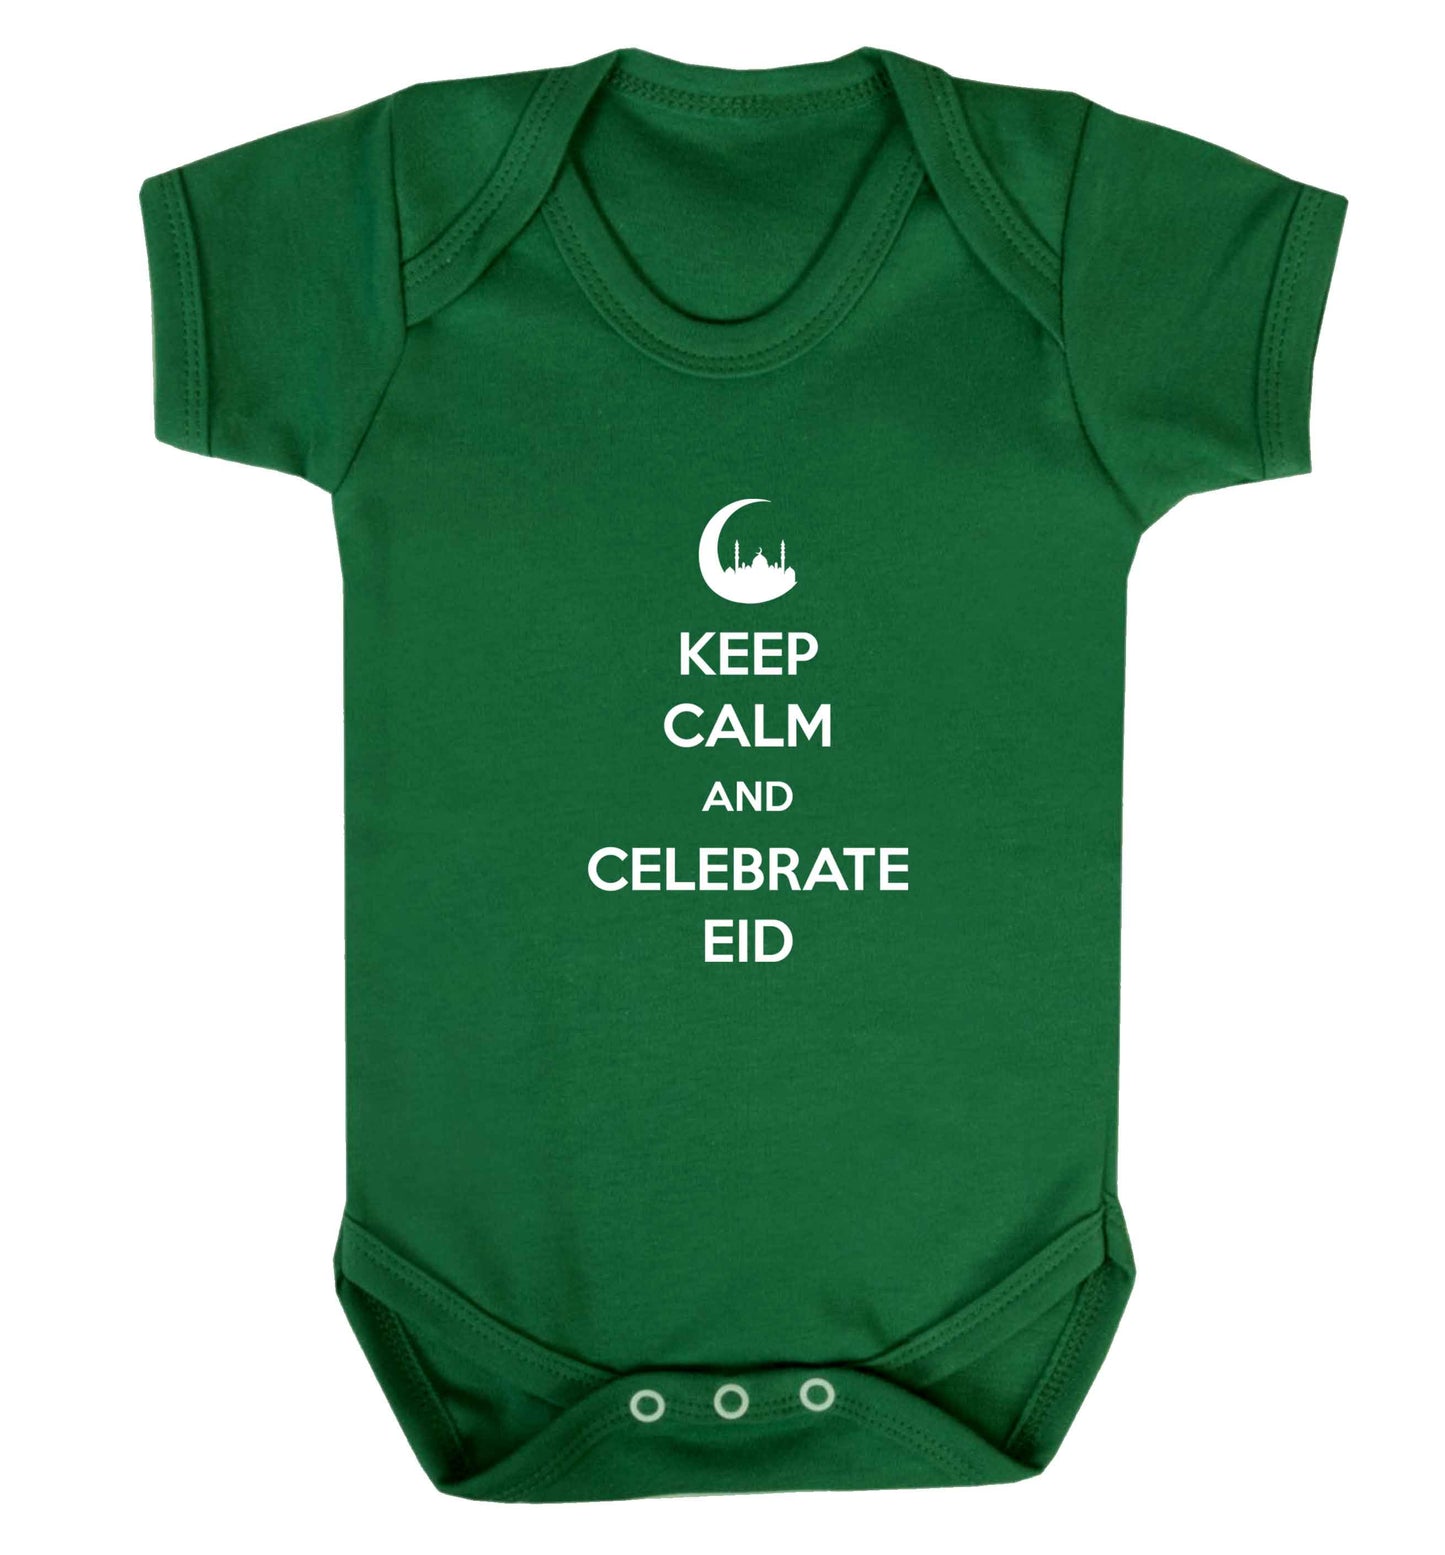 Keep calm and celebrate Eid baby vest green 18-24 months